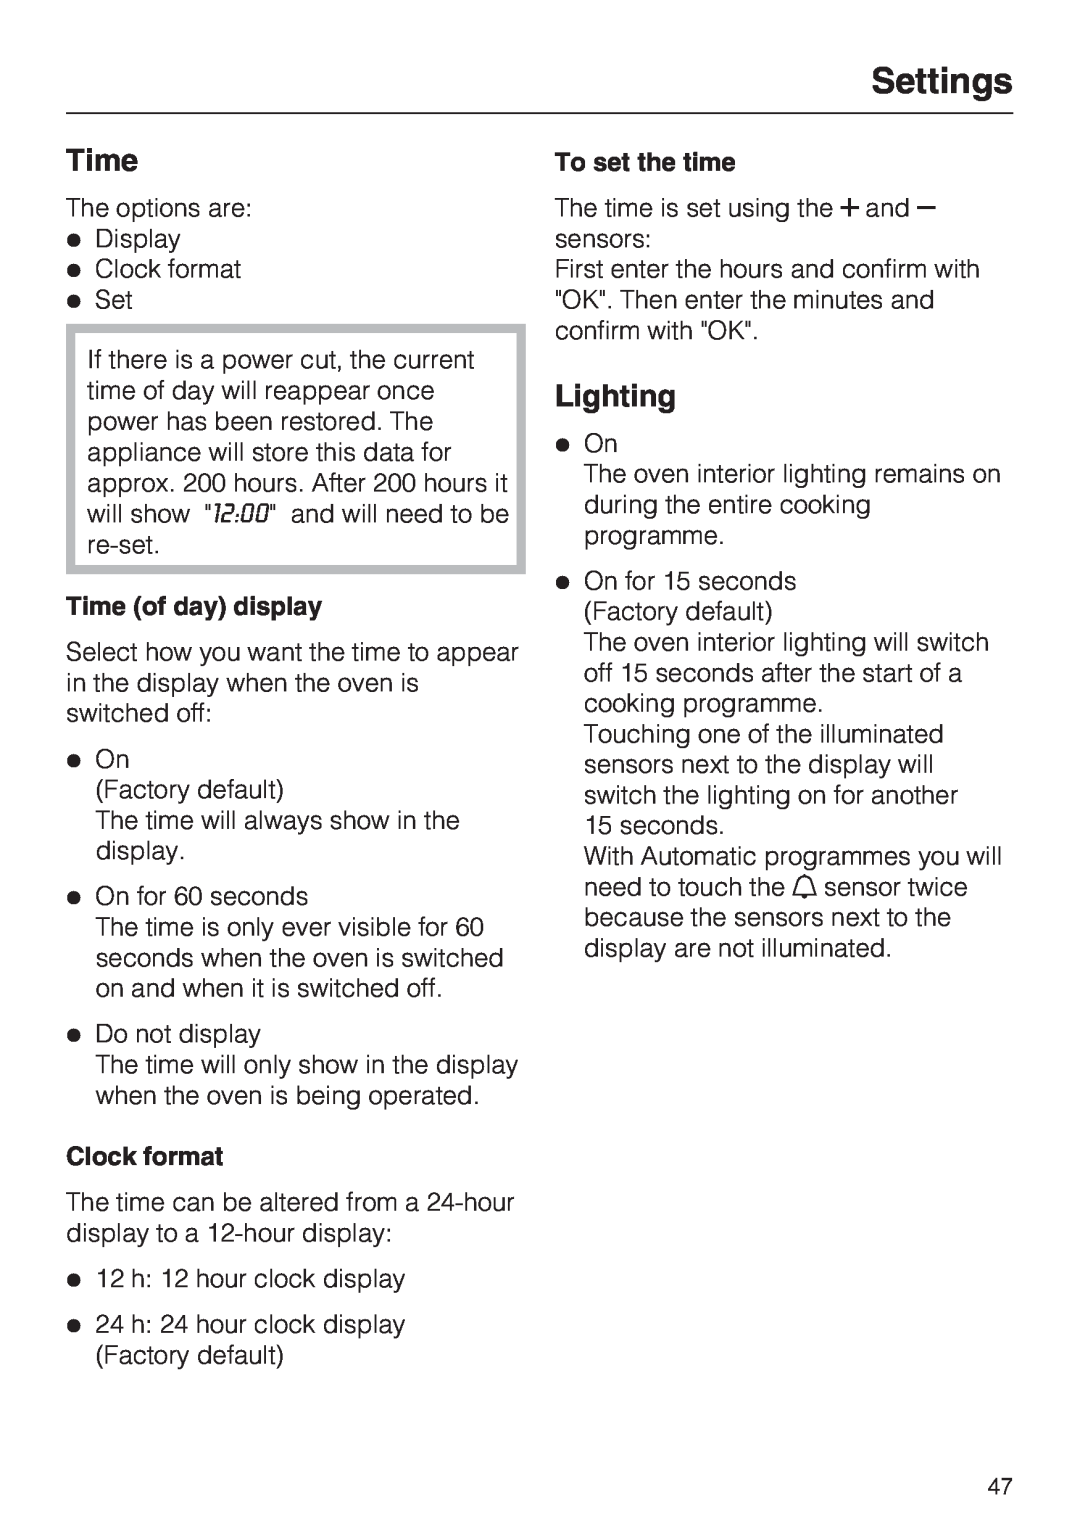 Miele H 5961 B installation instructions Lighting, To set the time, Settings, Time of day display, Clock format 